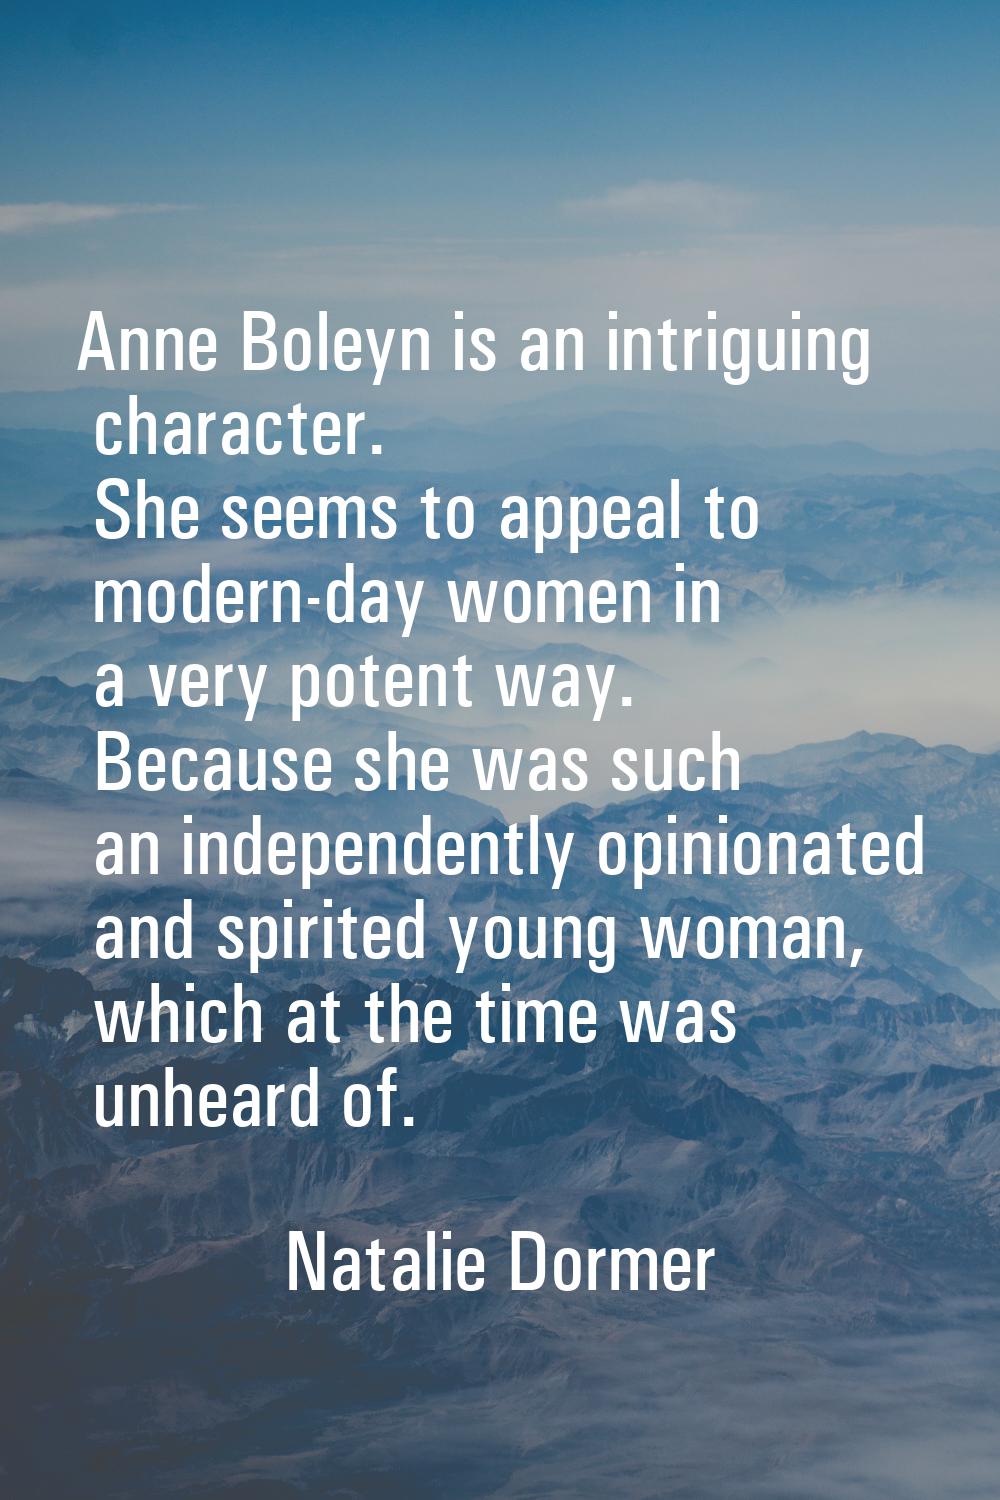 Anne Boleyn is an intriguing character. She seems to appeal to modern-day women in a very potent wa